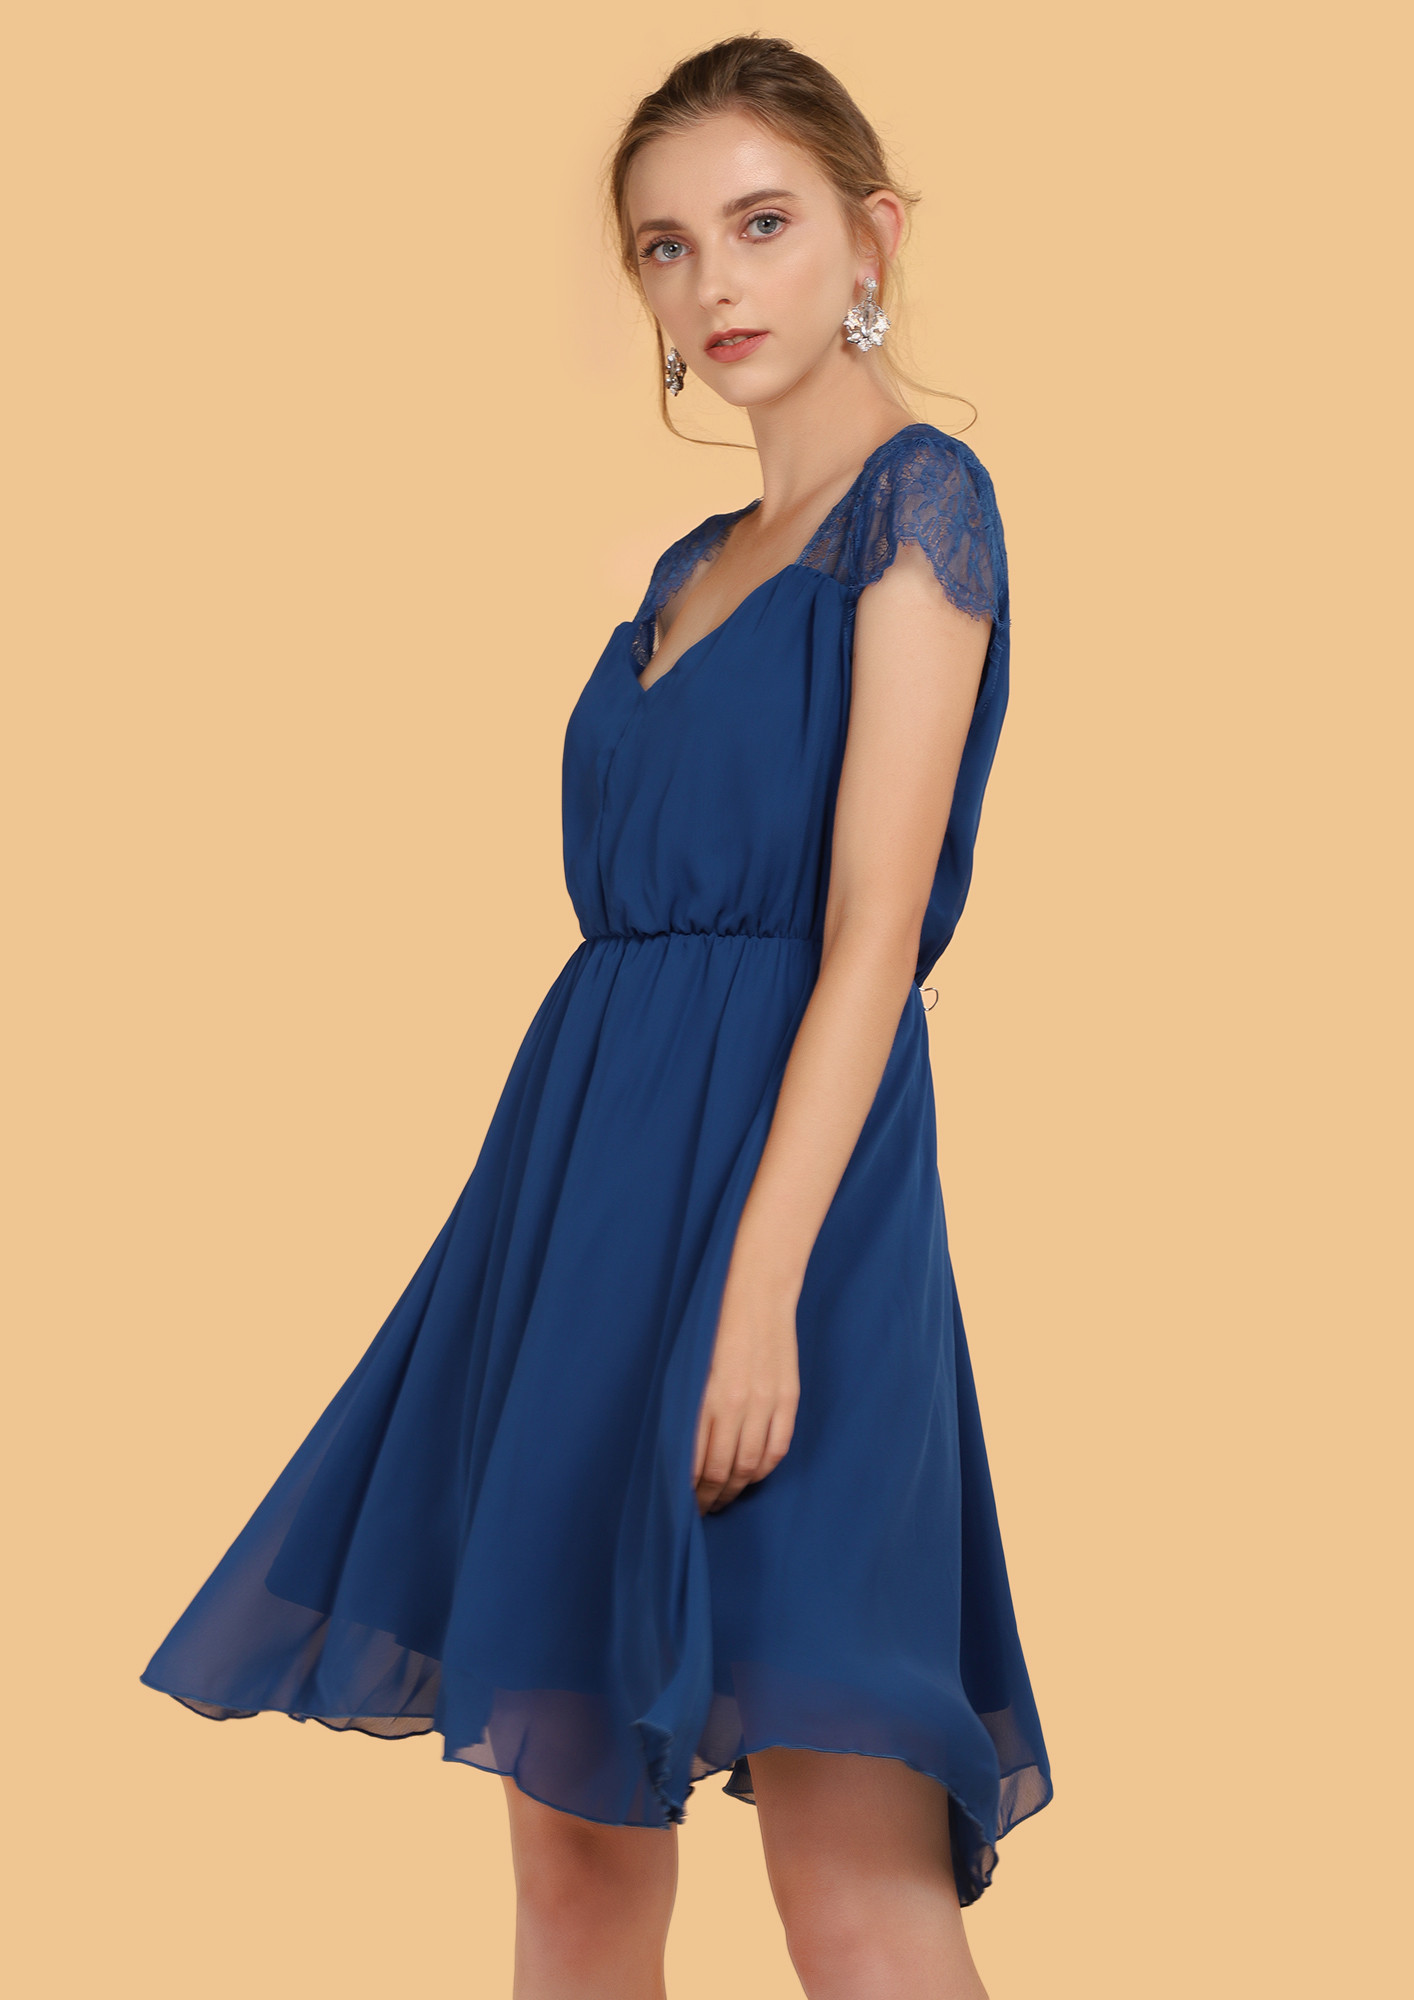 PERFECTLY MESHED BLUE SKATER DRESS